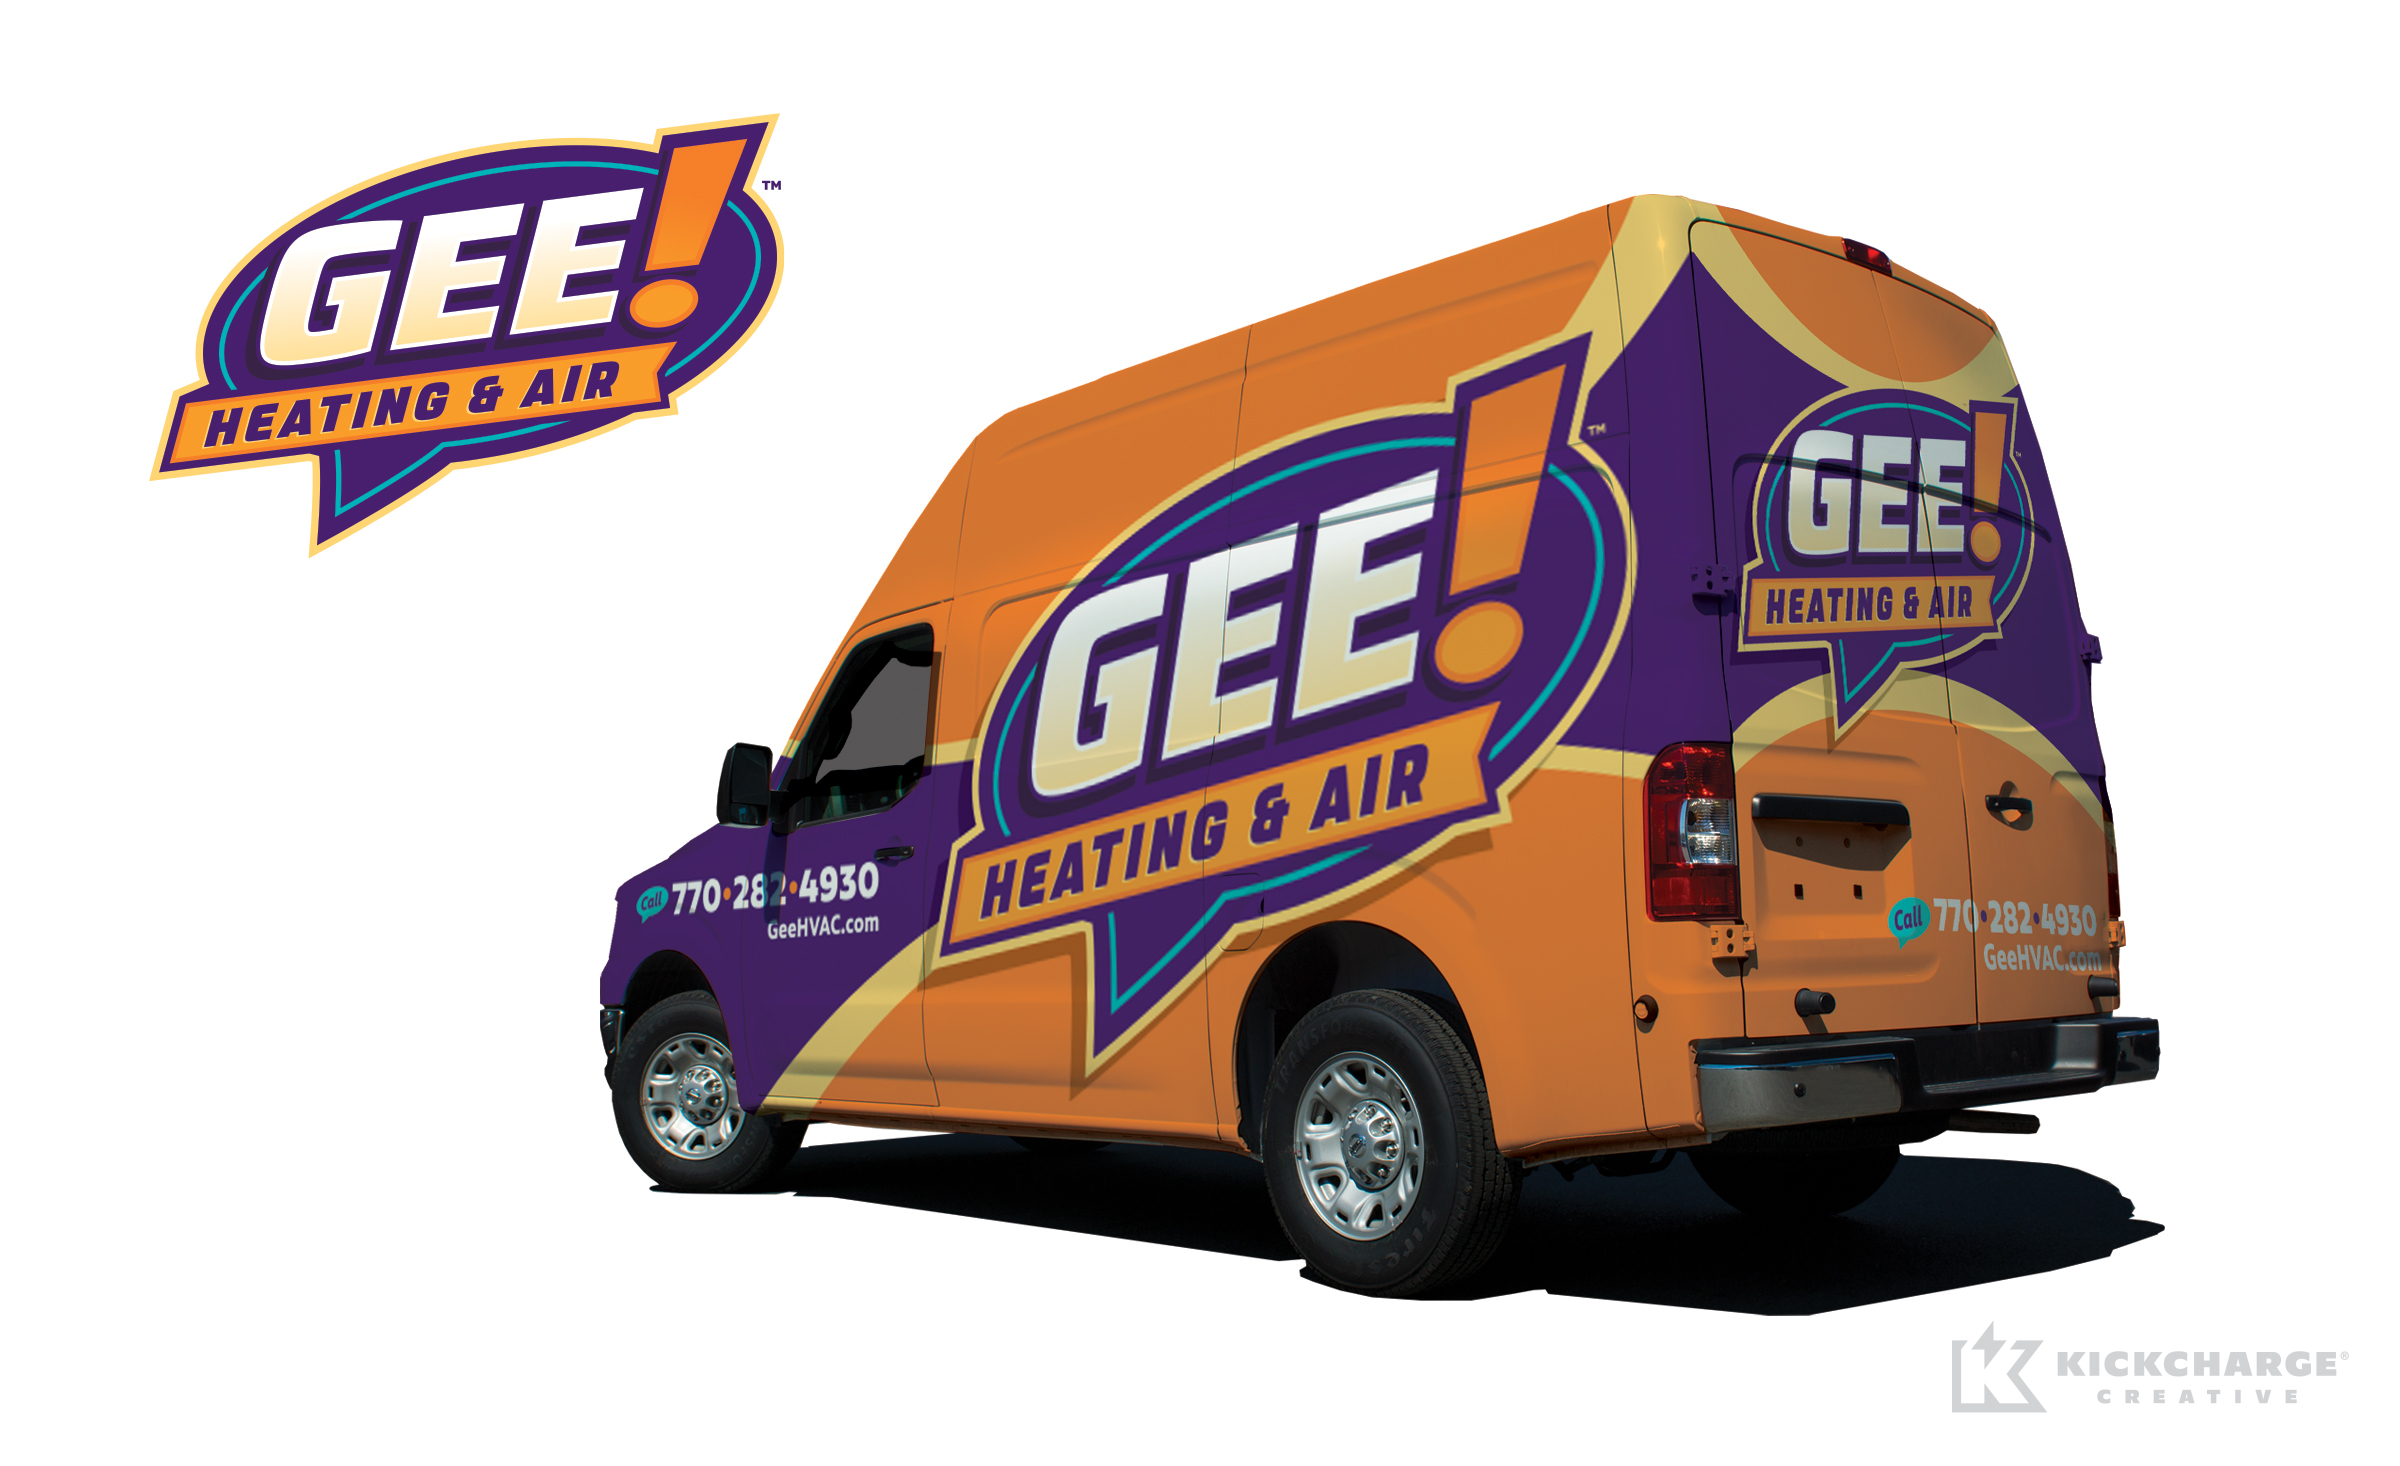 hvac truck wrap for Gee! Heating & Air